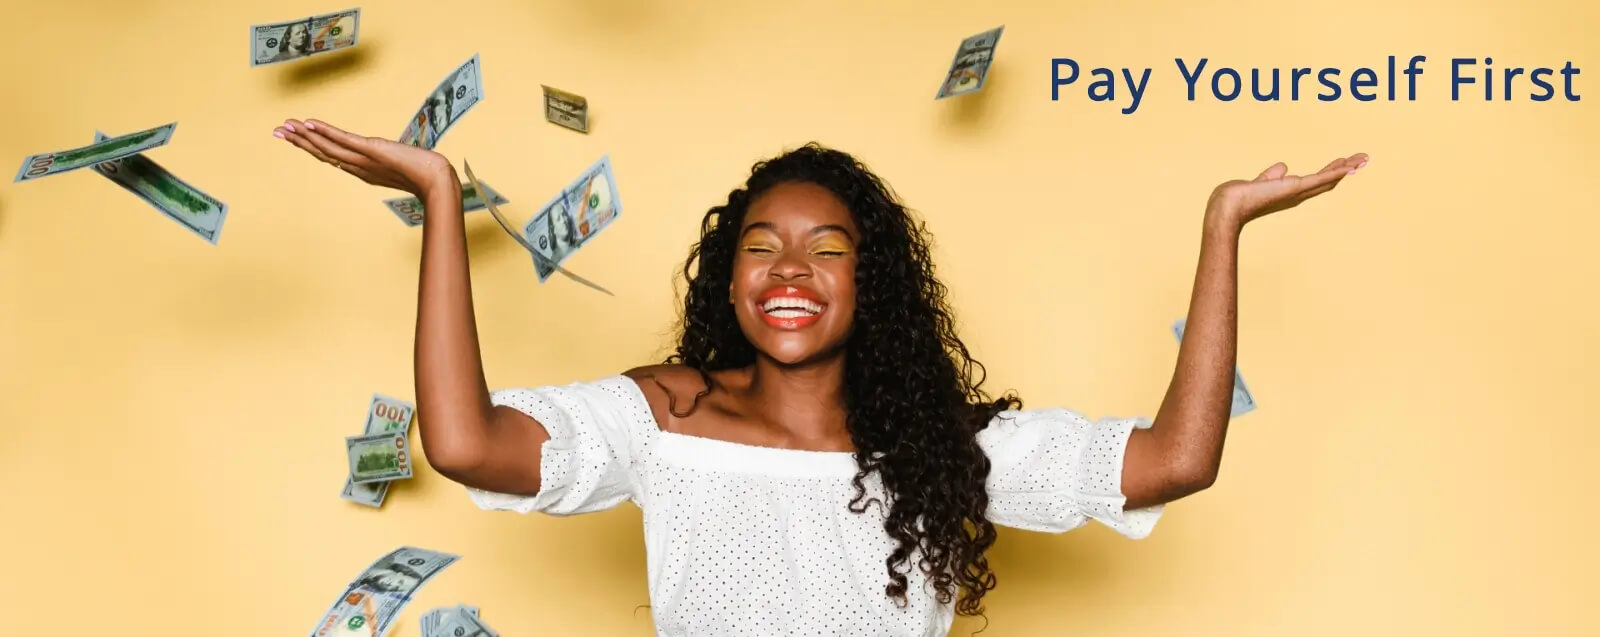 woman throwing money into the air with caption pay yourself first